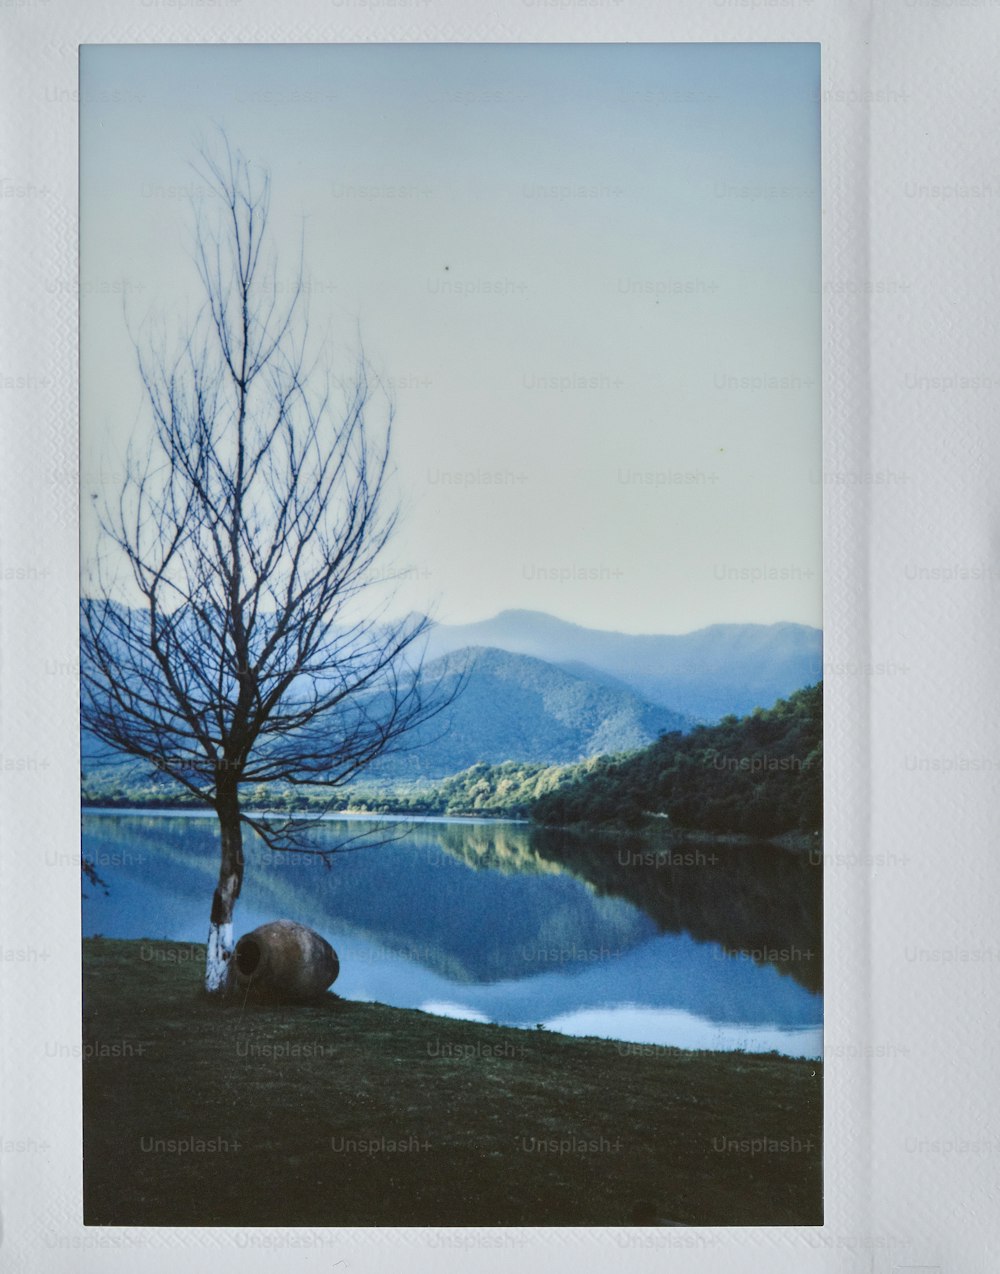 a picture of a tree and a body of water